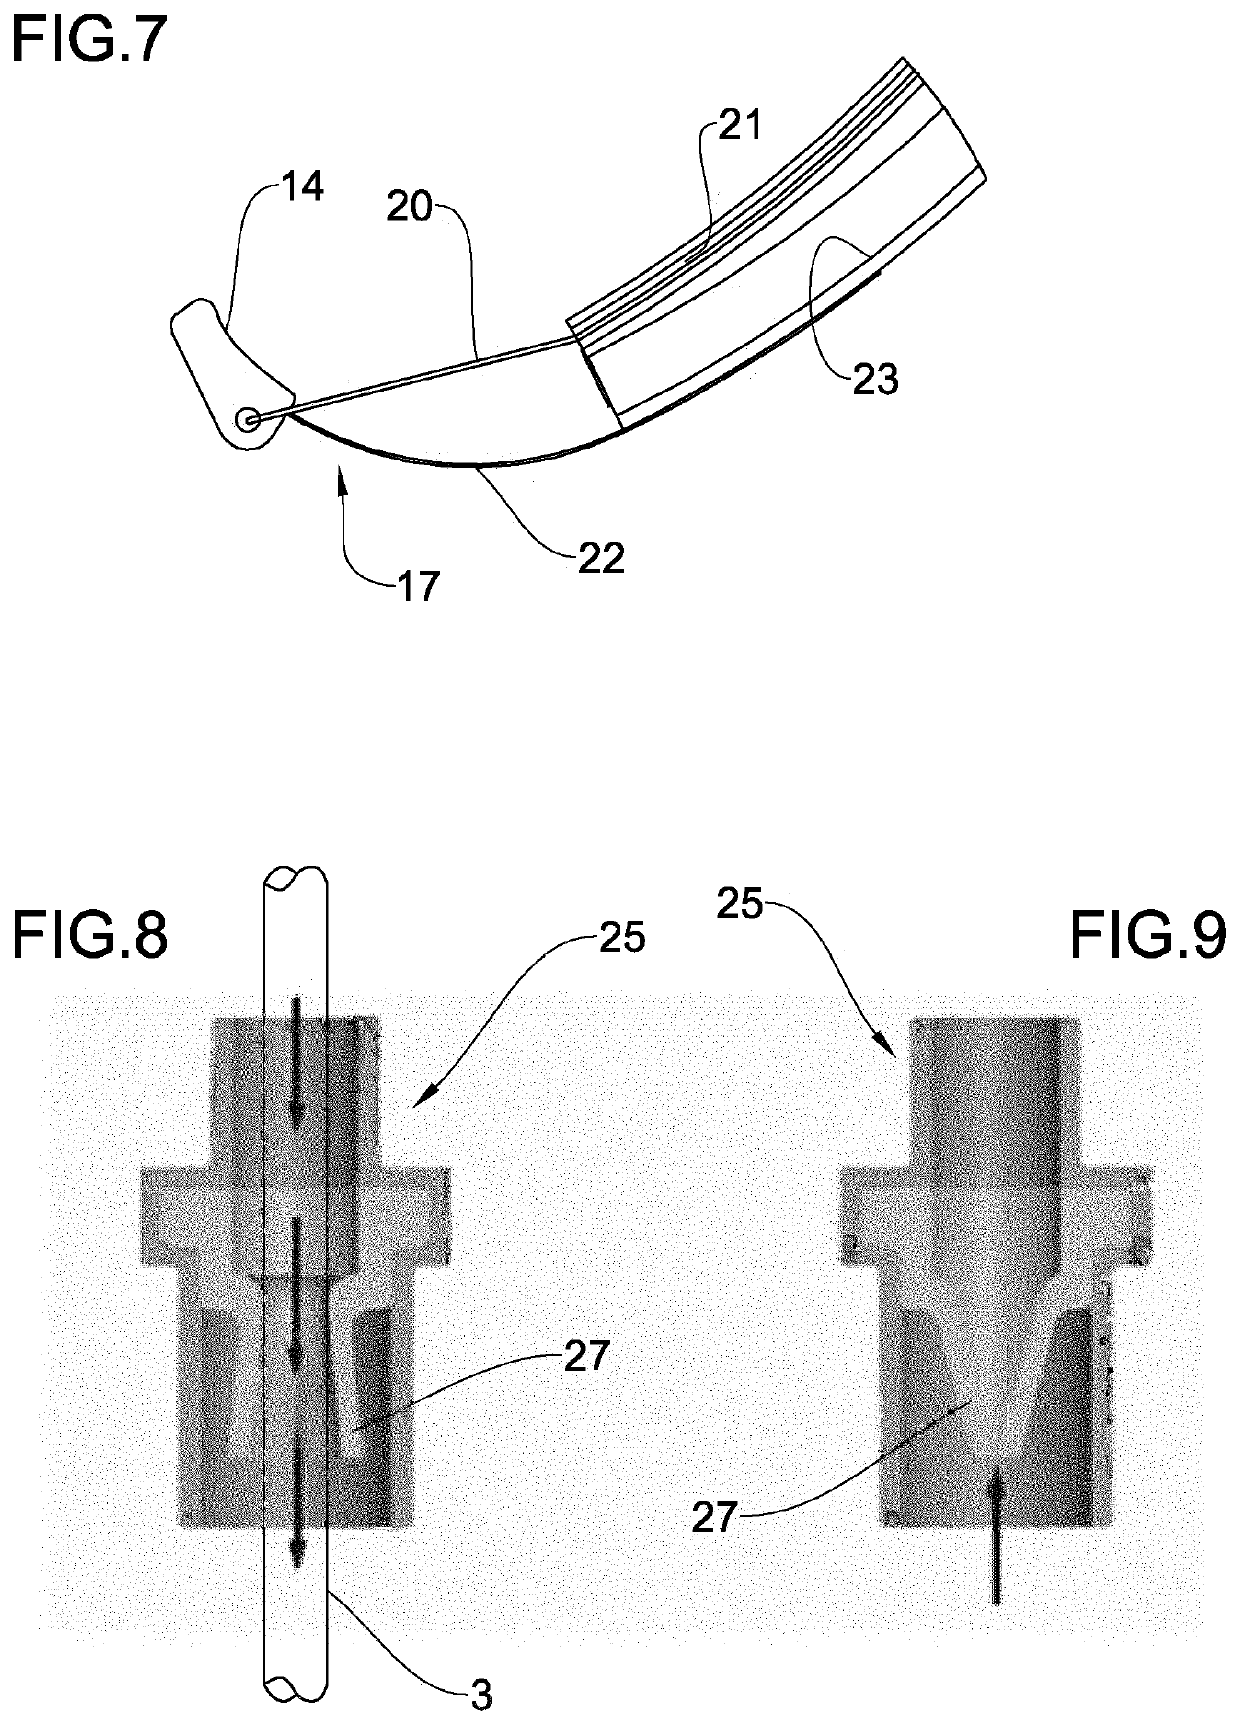 Laryngeal mask airway device and method for administering a medicament through a laryngeal mask airway device